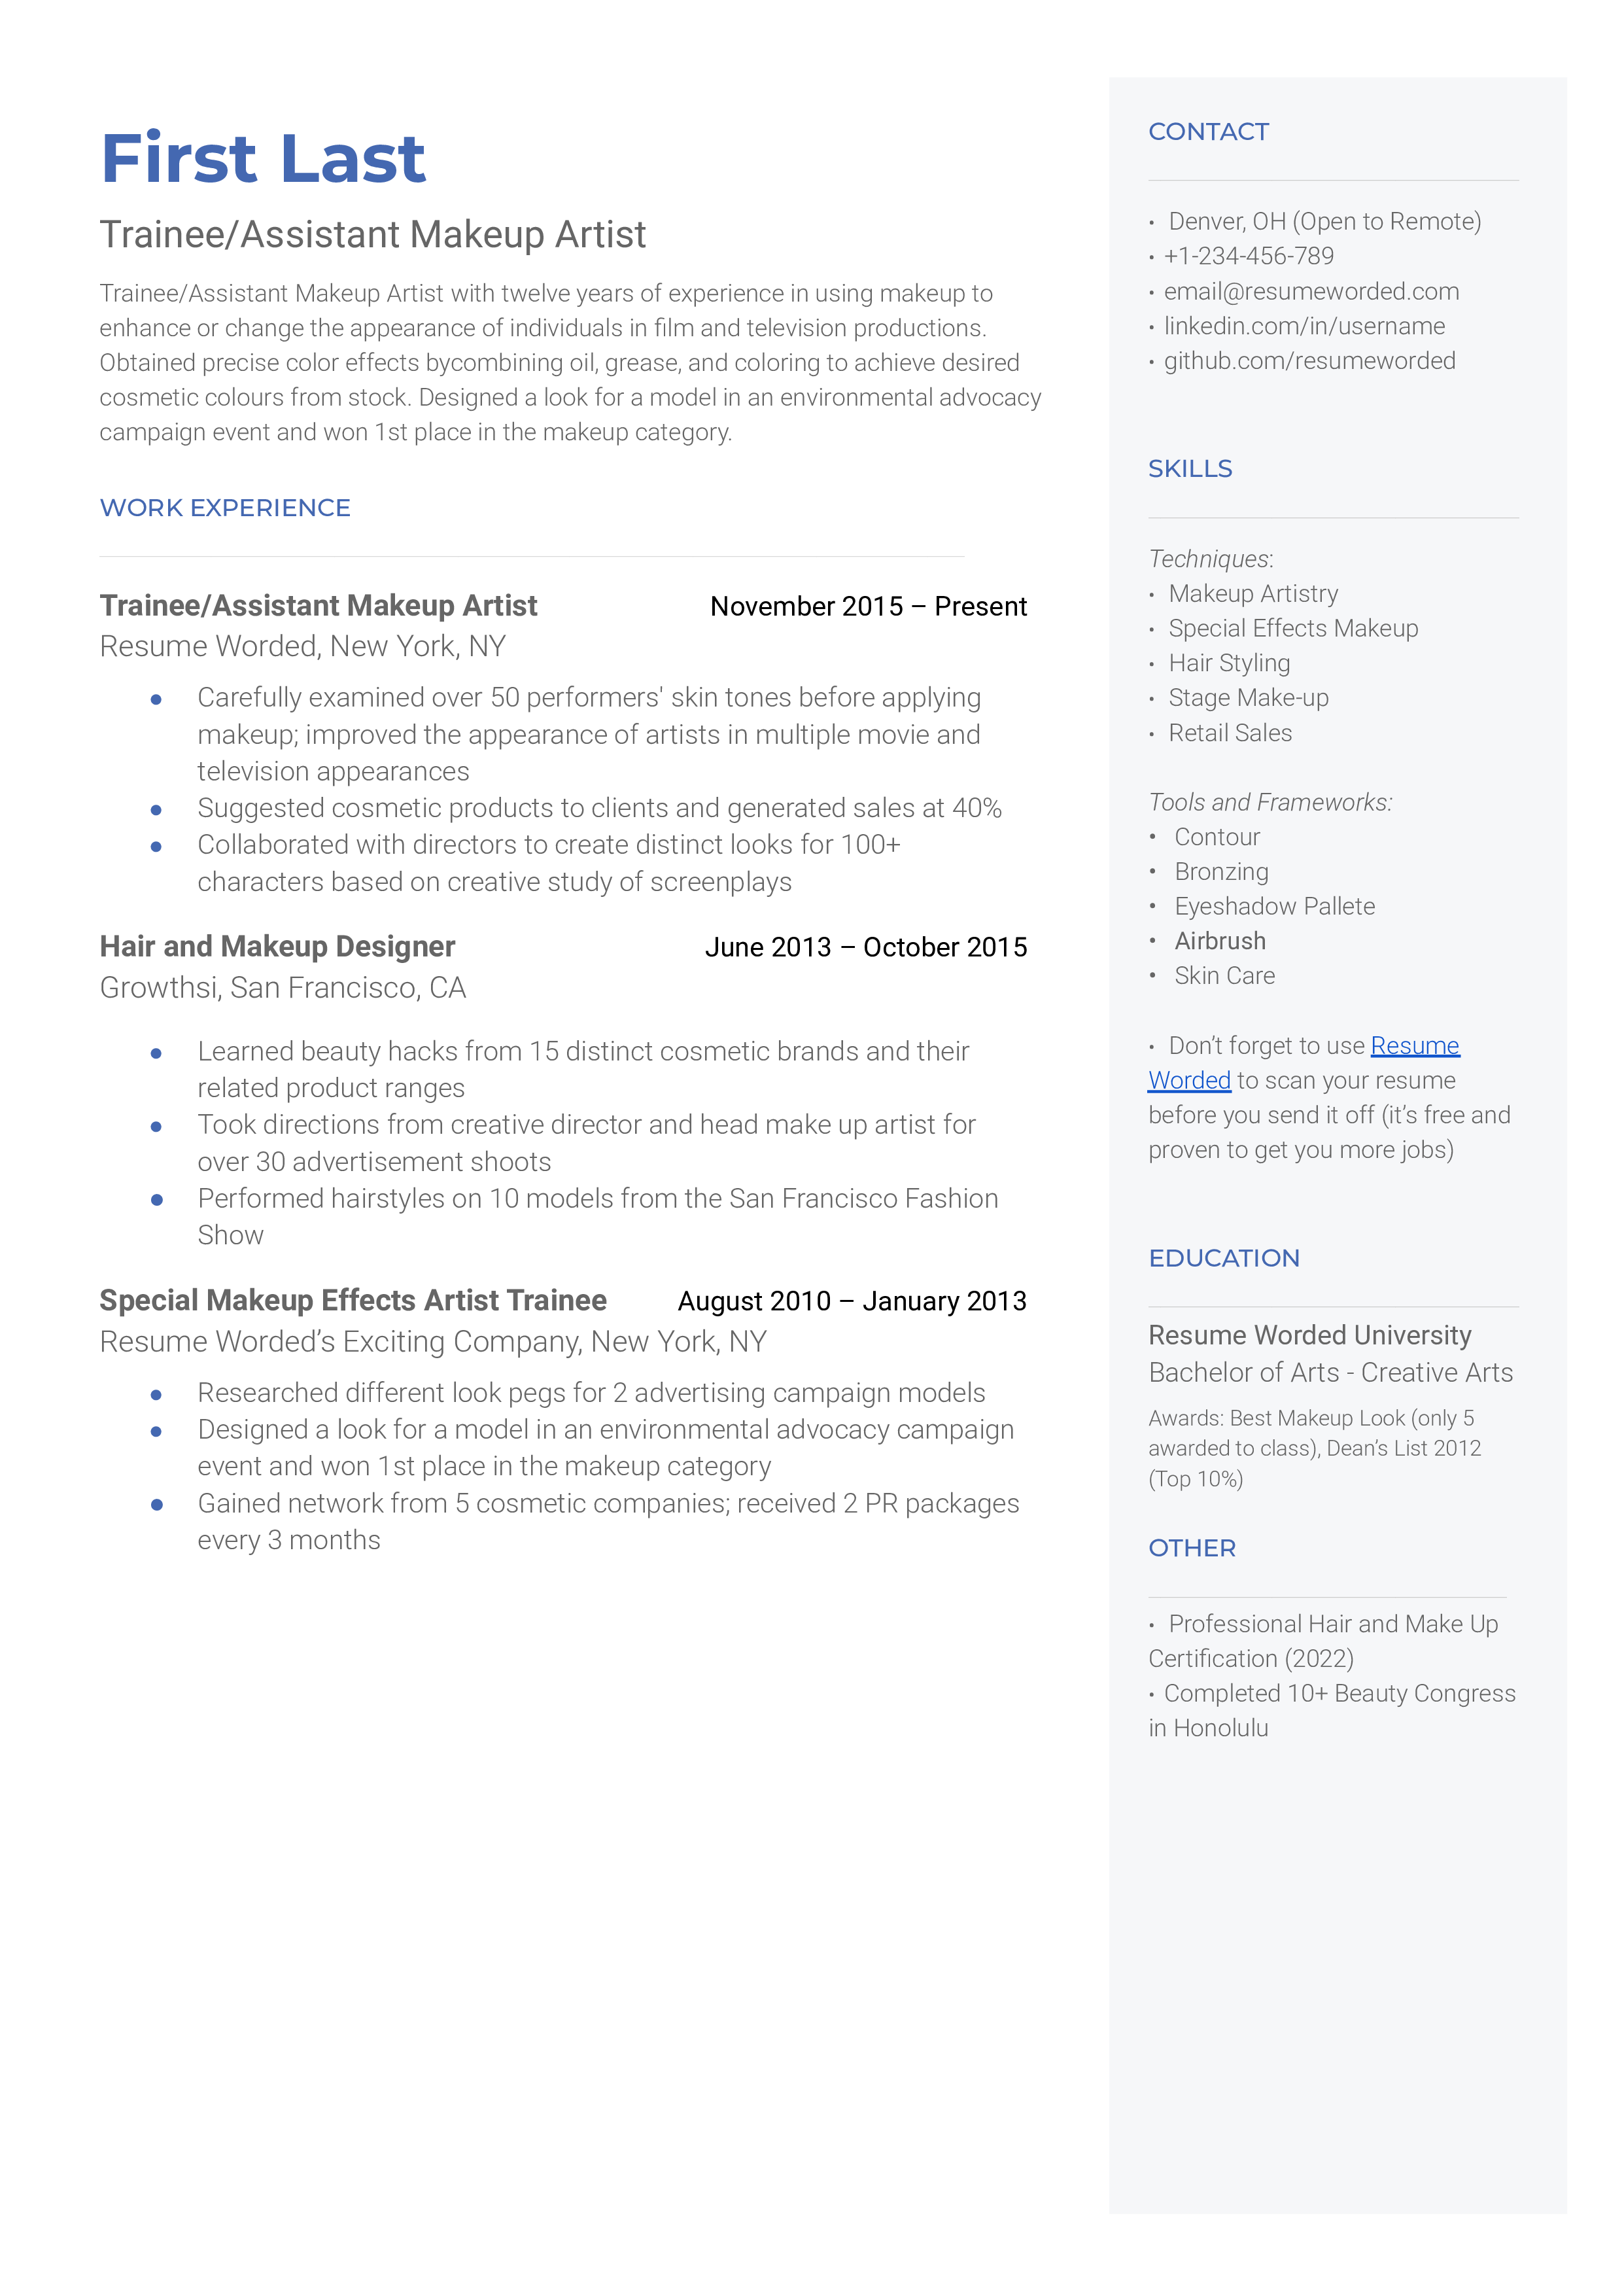 Trainee assisstant makeup artist resume sample that highlights training and experience